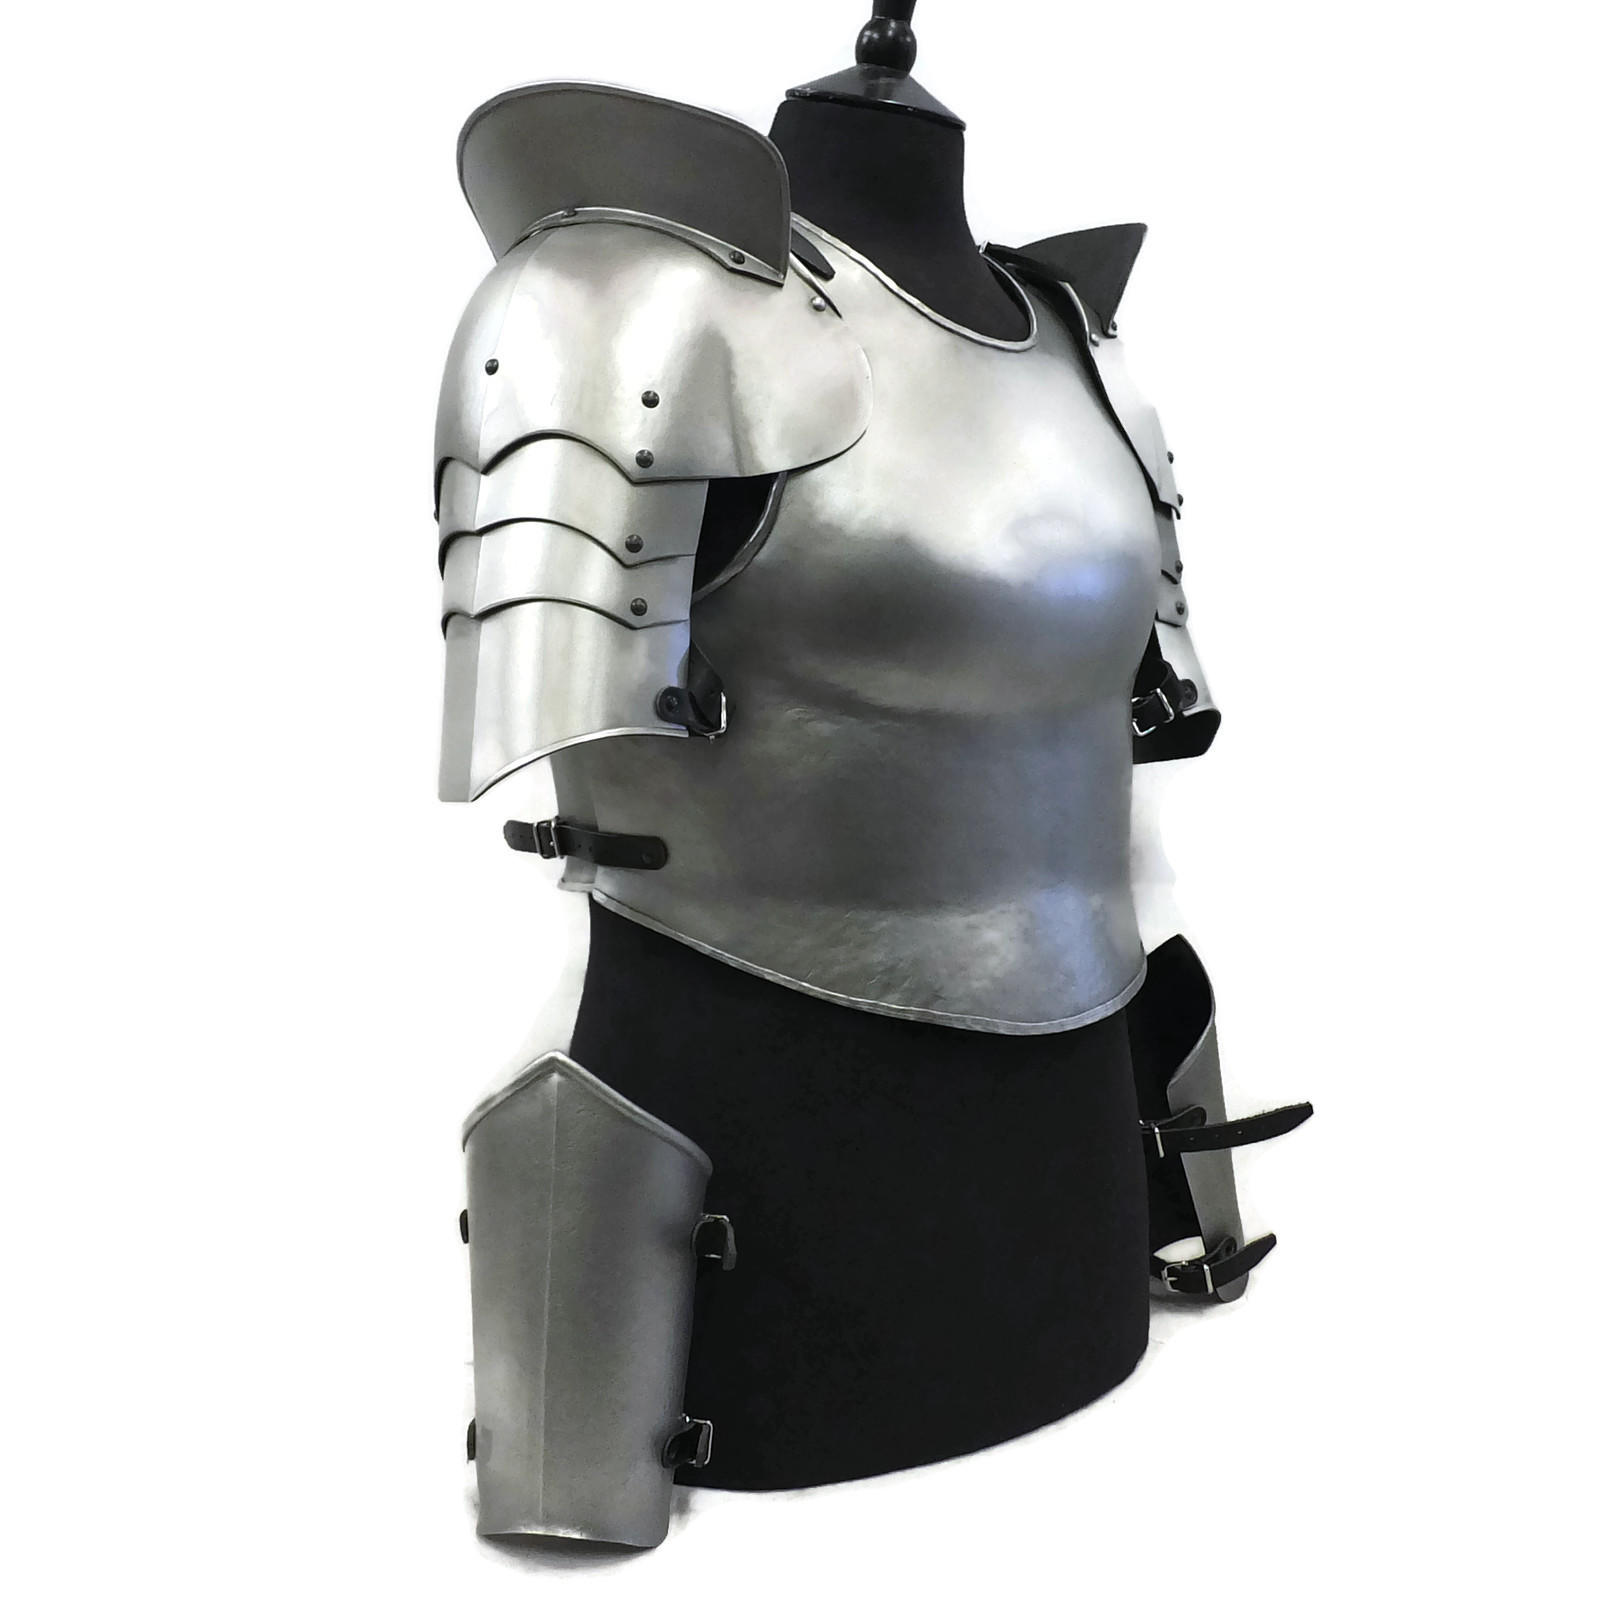 female medieval leather armor